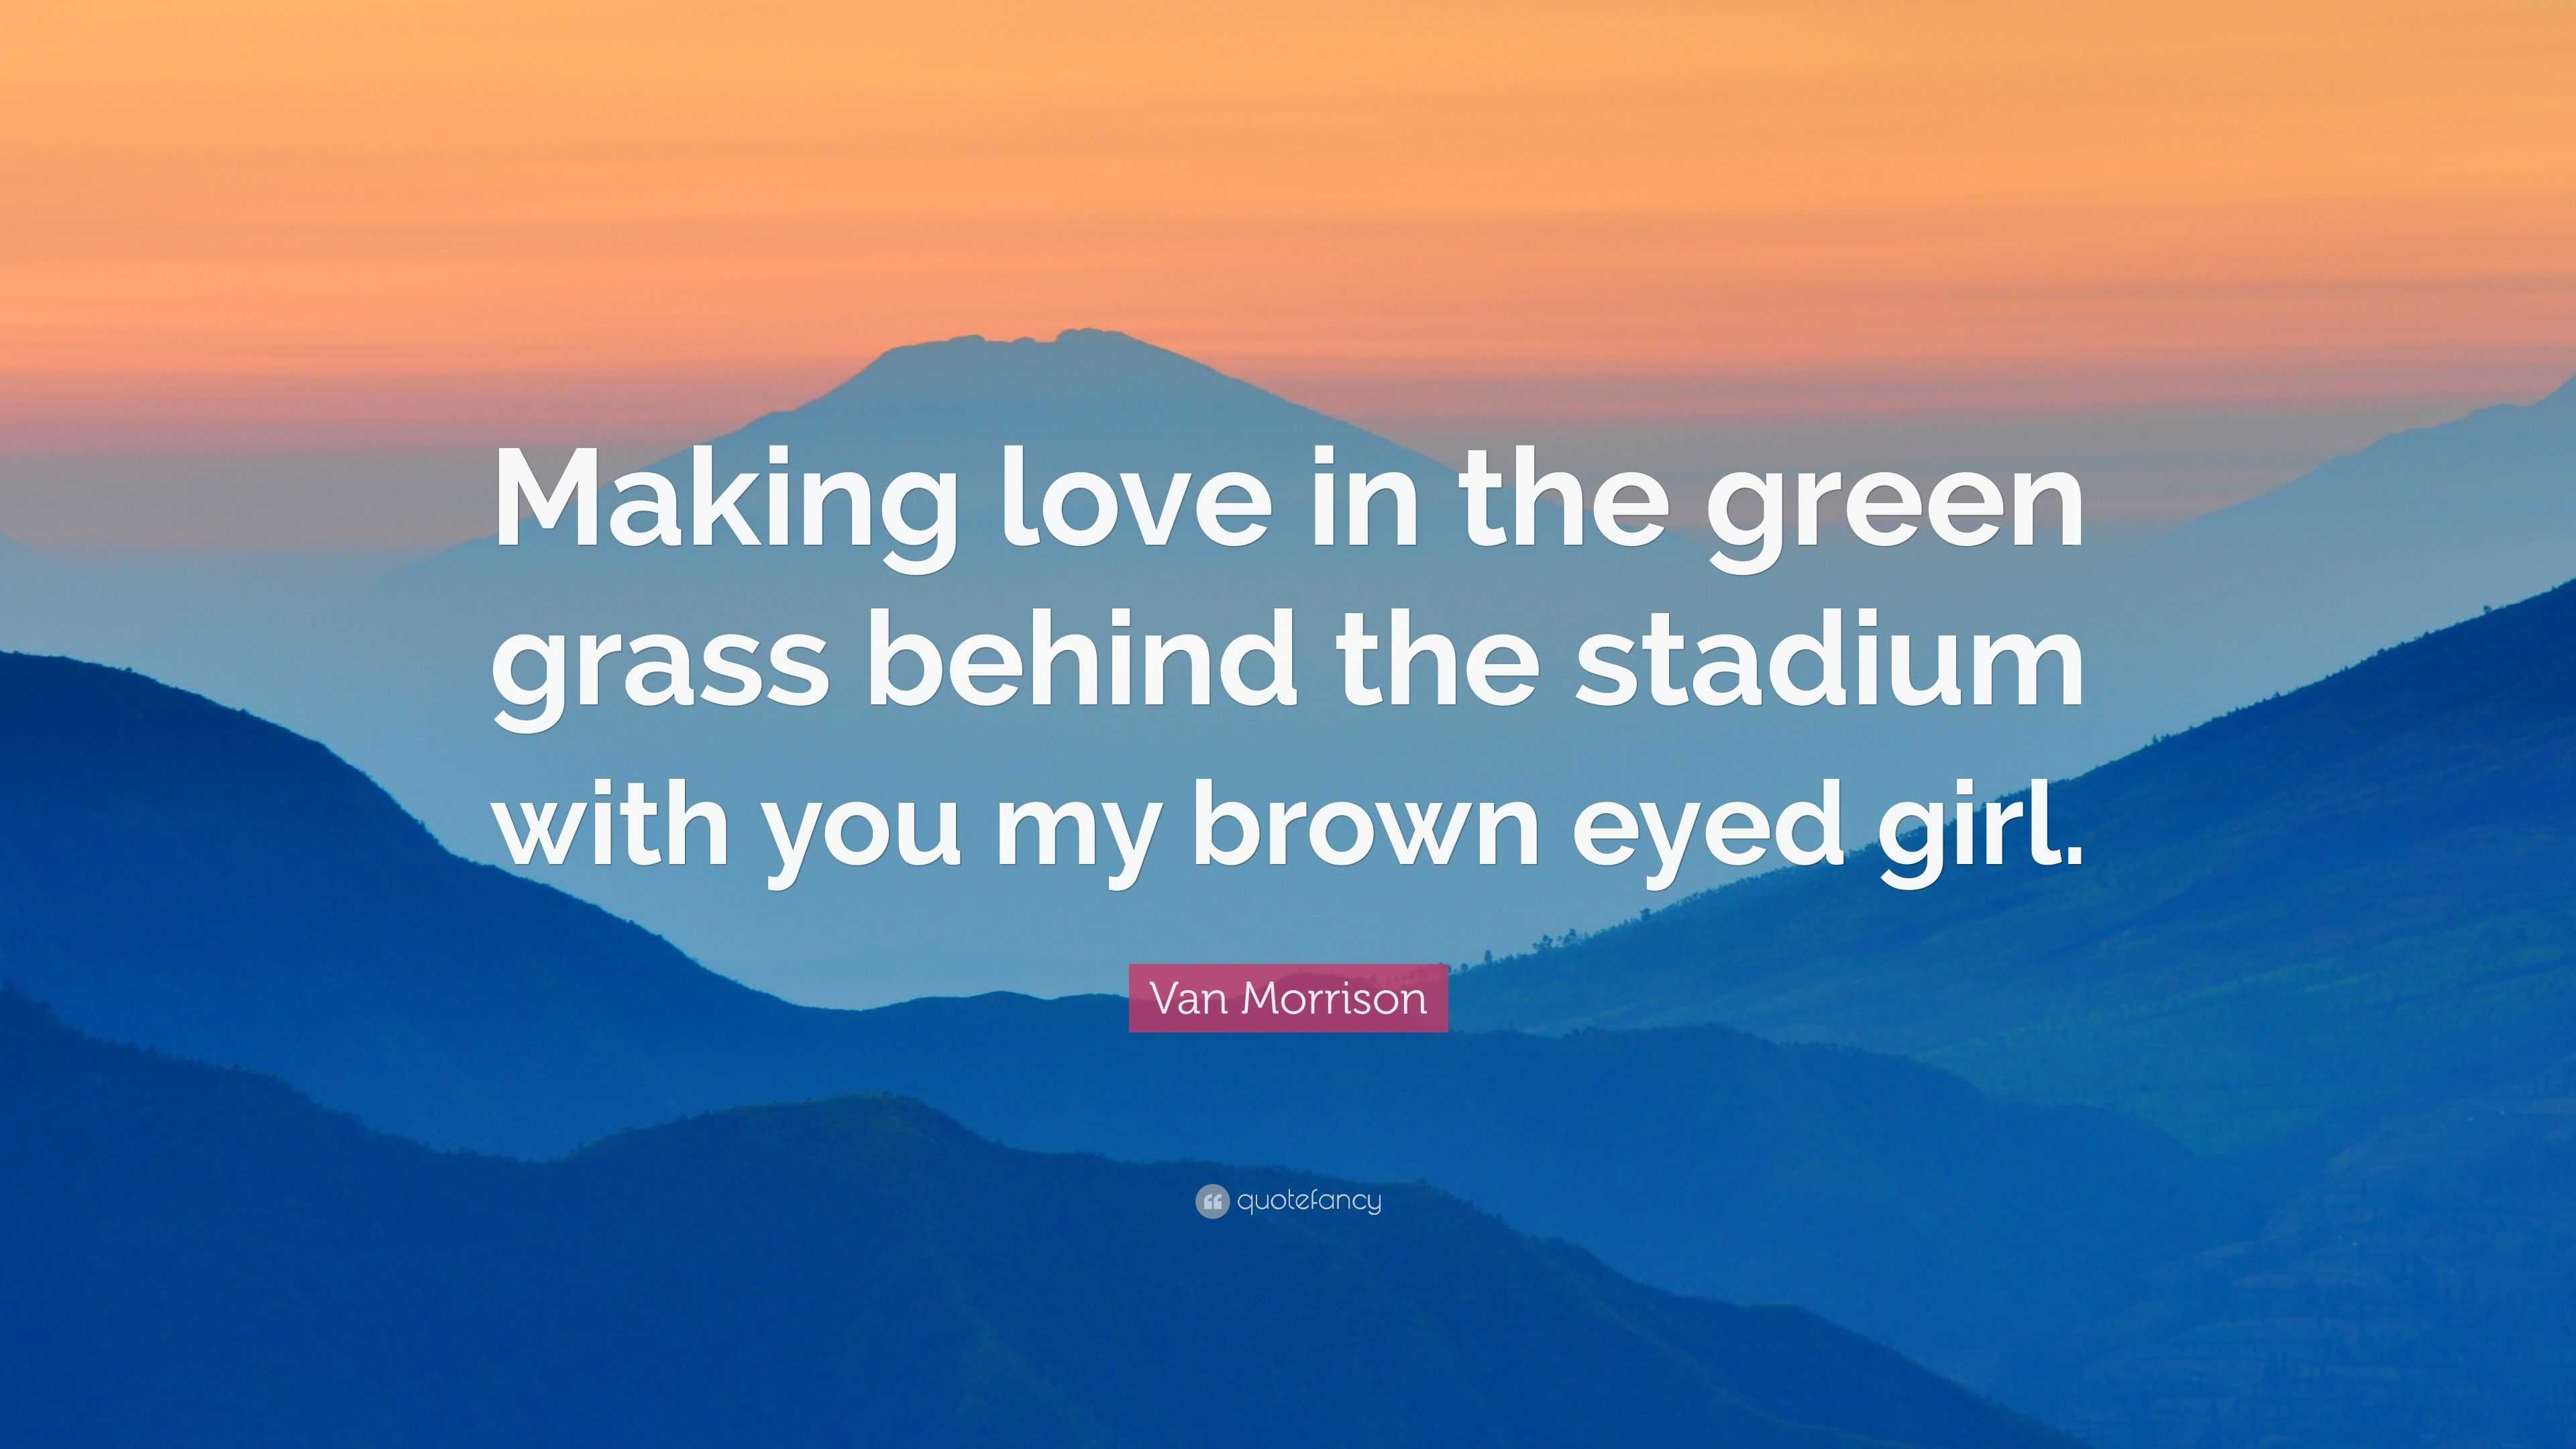 Van Morrison Quote “Making love in the green grass behind the stadium with you